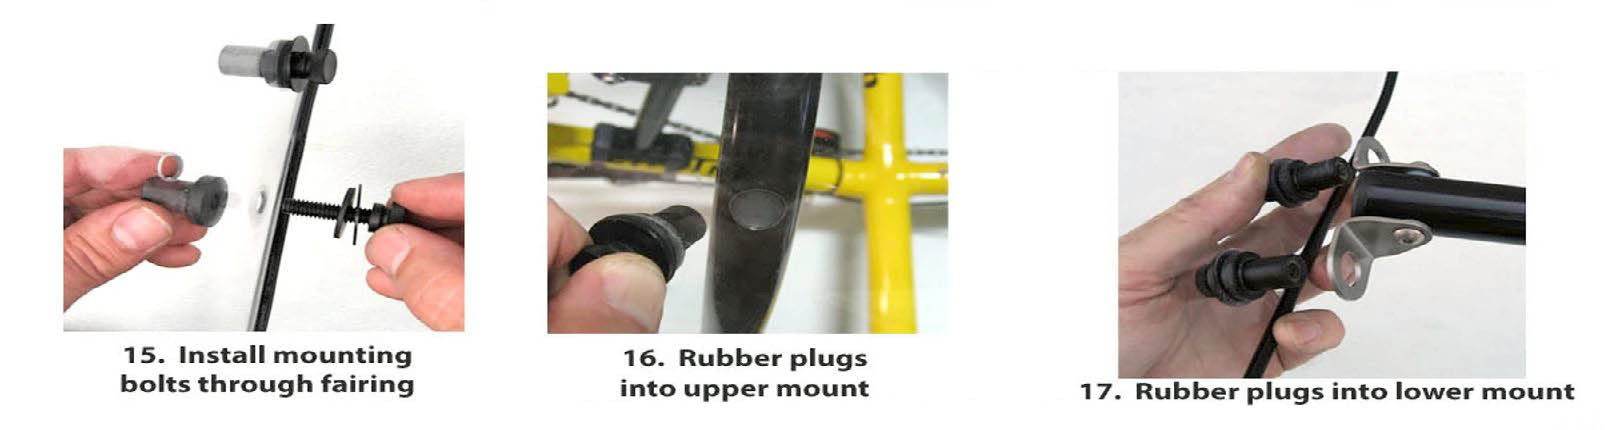 T-Cycle Windwrap Fairing Rubber Nuts Set of 5 installation instructional images